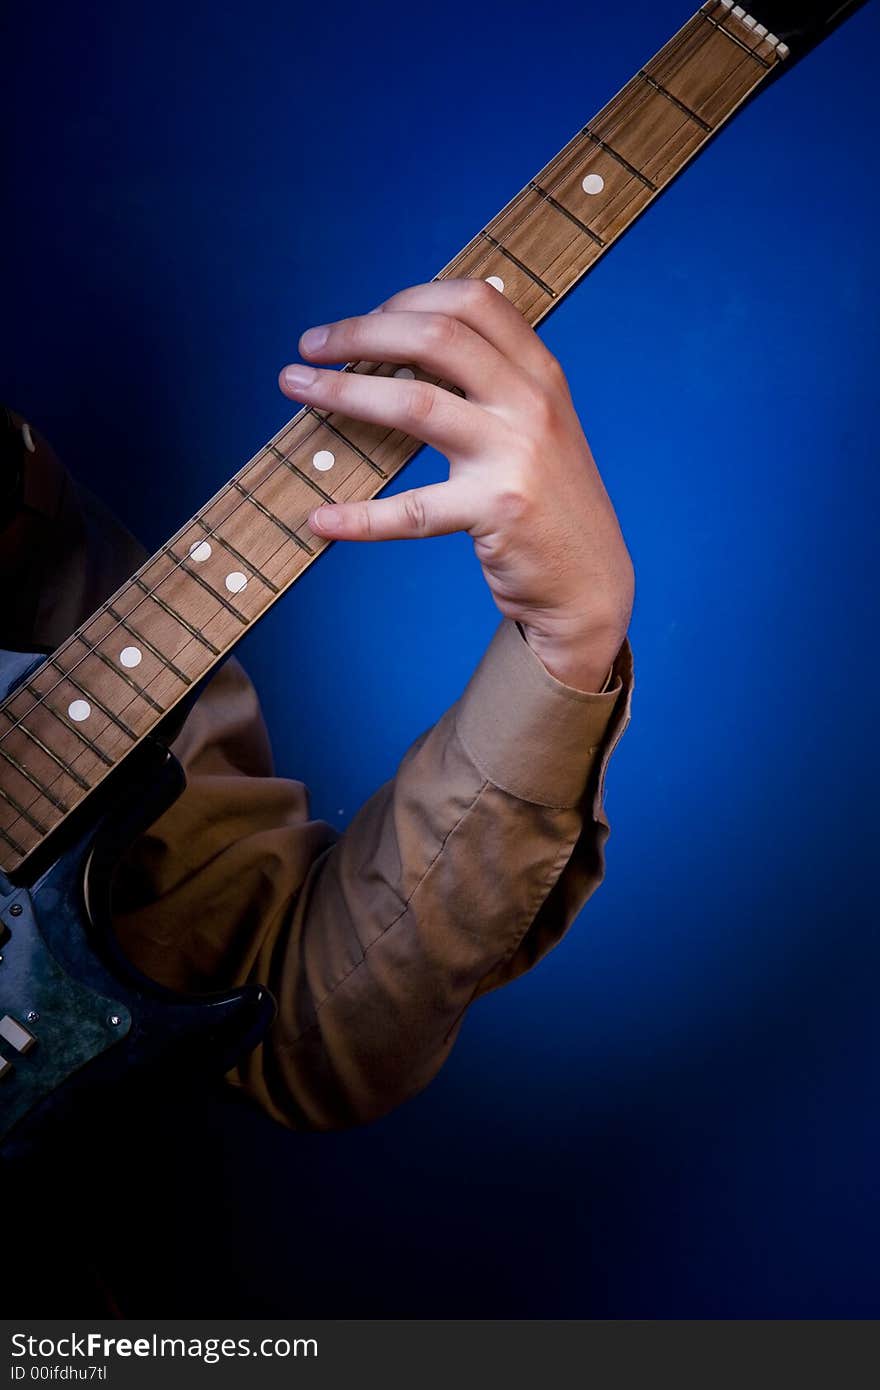 Guitarist hand on an electric guitar fretboard. Blue background. Guitarist hand on an electric guitar fretboard. Blue background